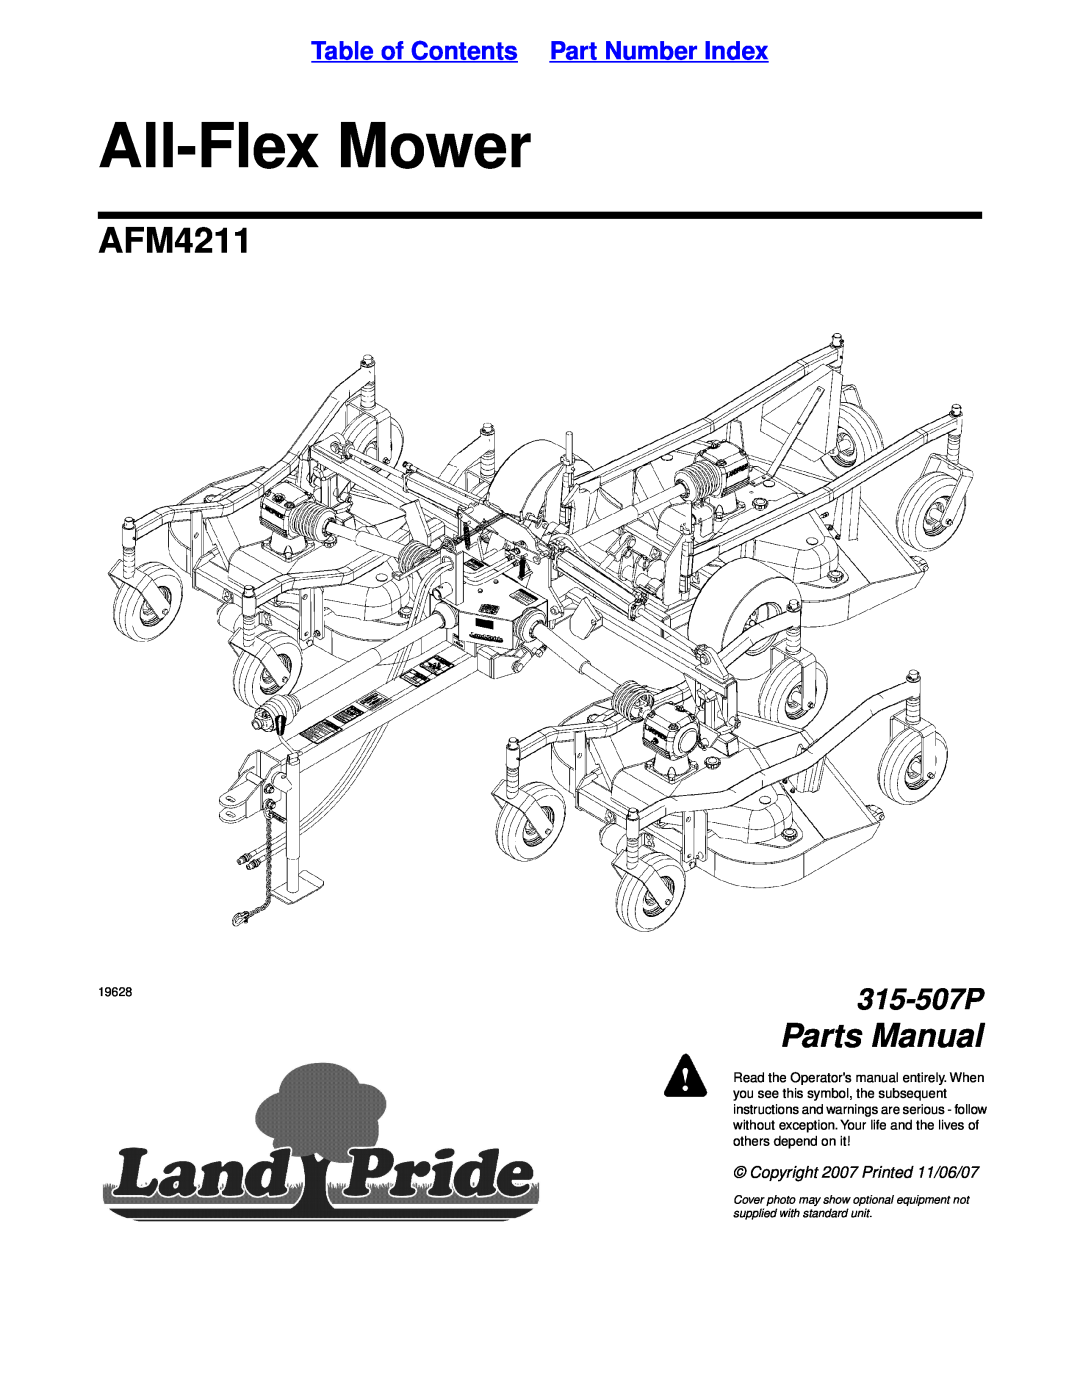 Land Pride AFM4211 manual Table of Contents Part Number Index, All-FlexMower, Parts Manual, 315-507P, others depend on it 